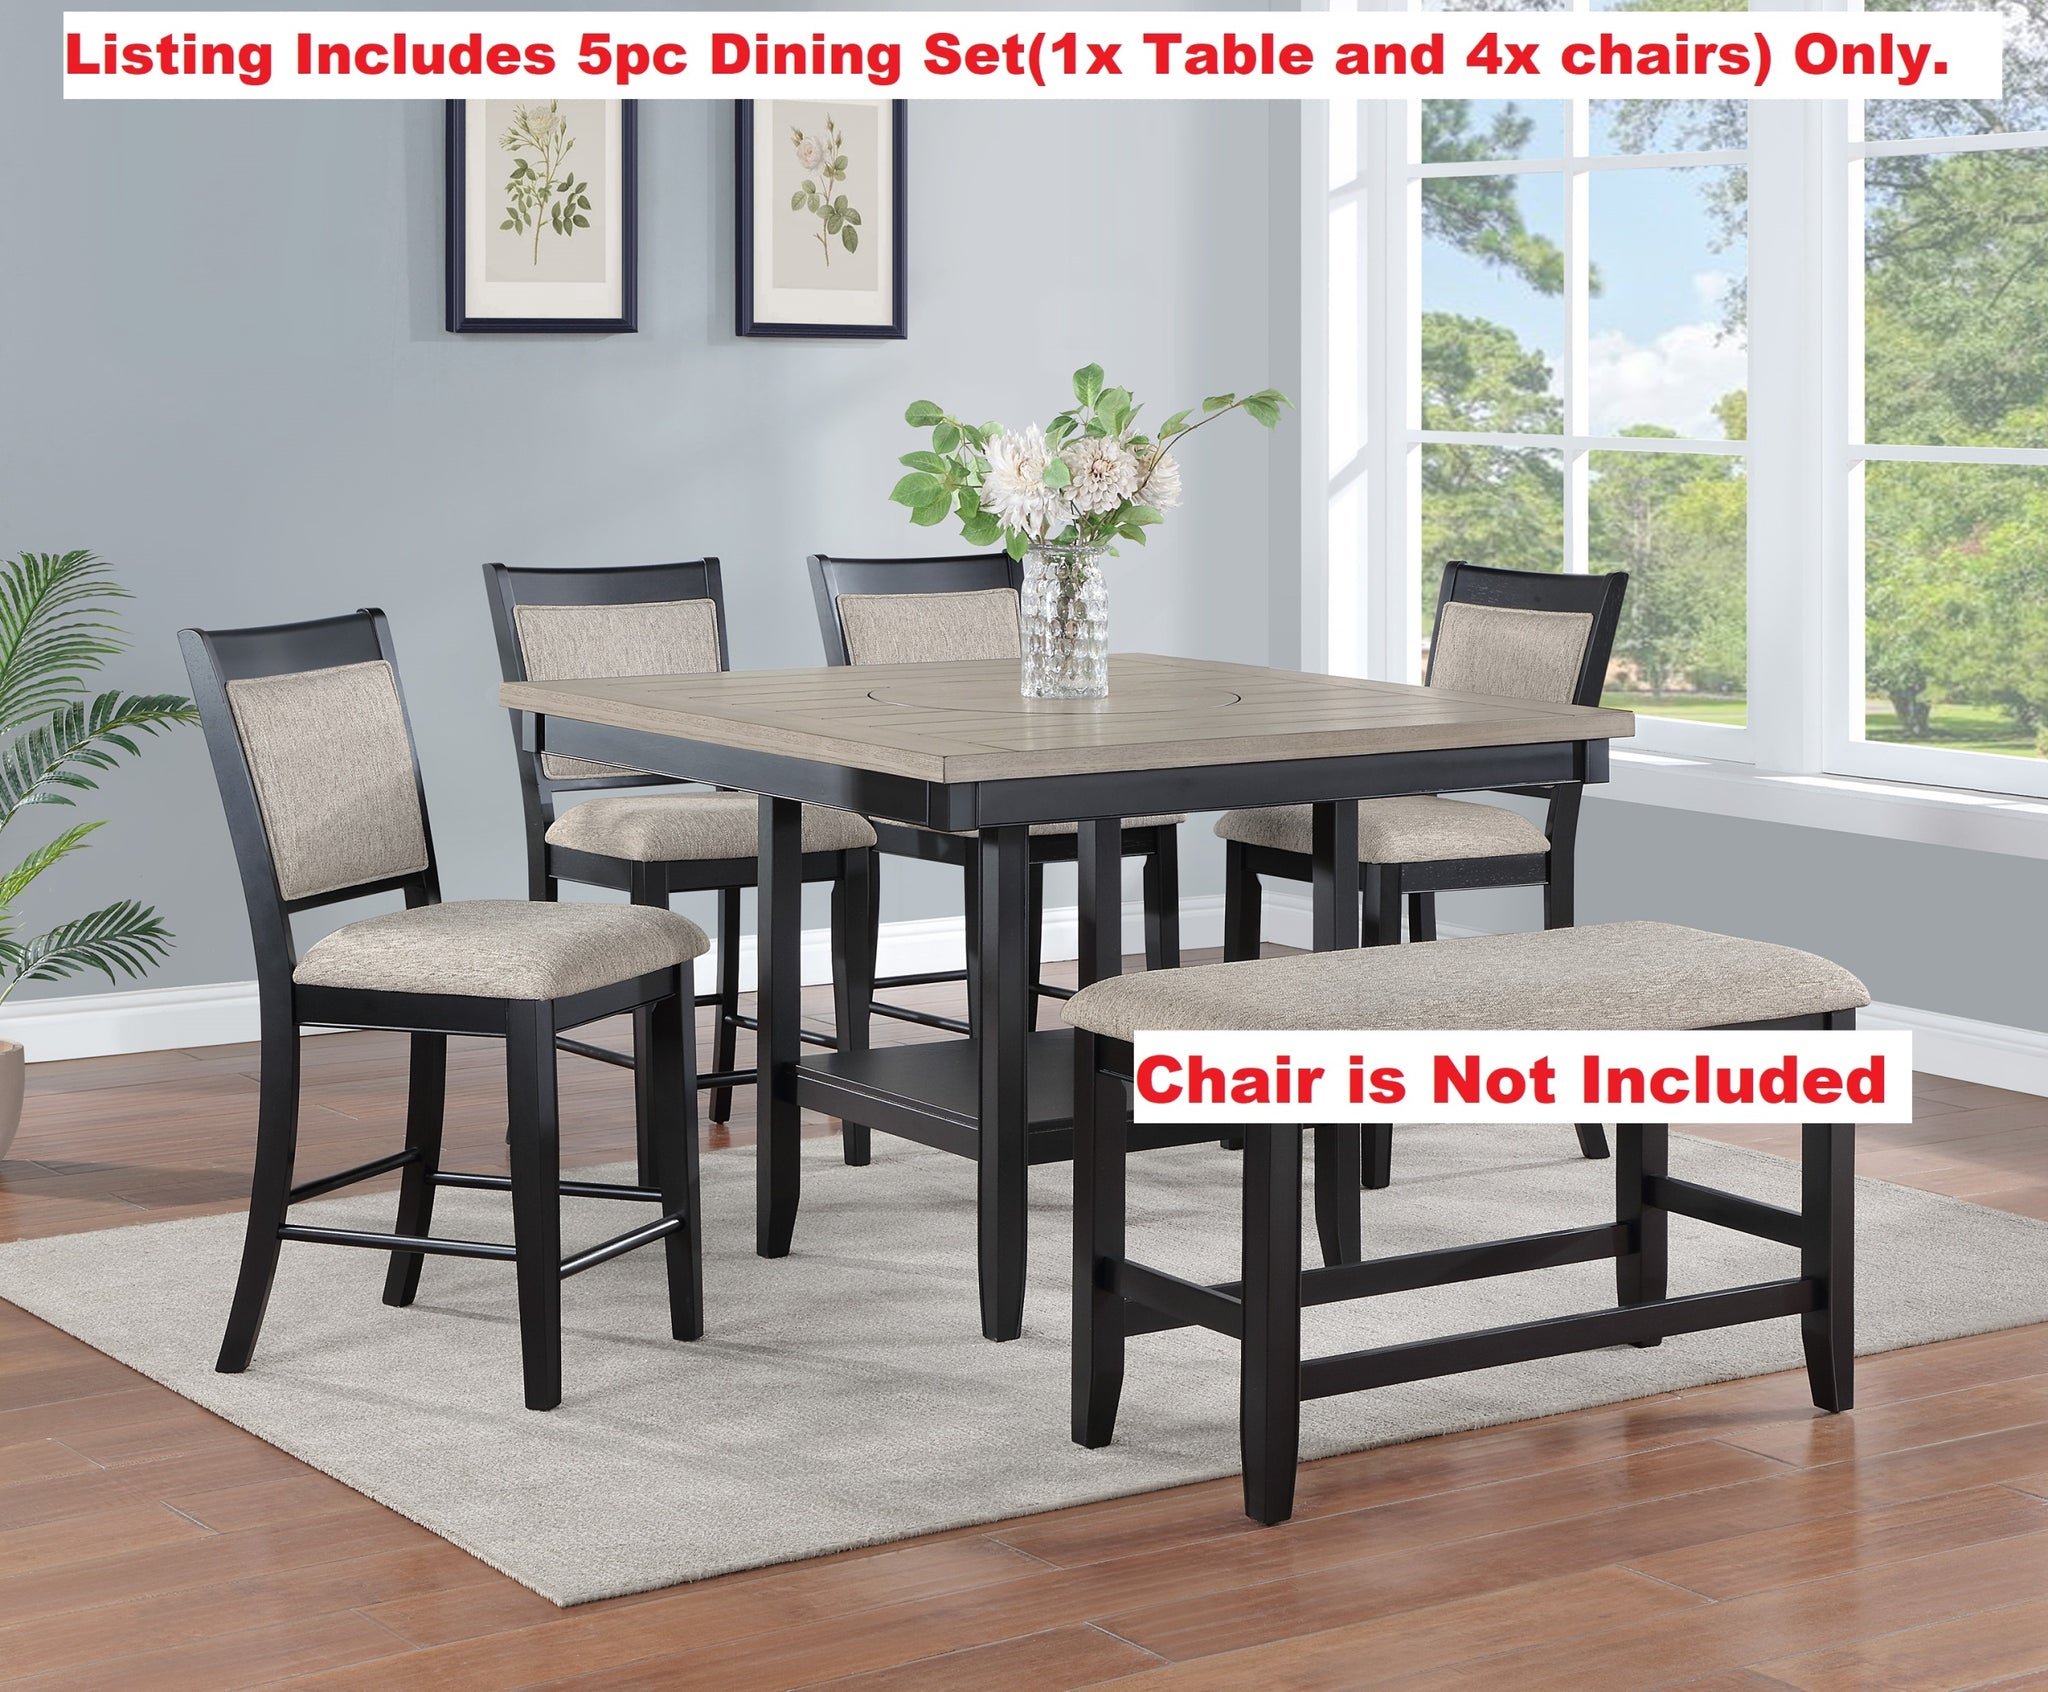 5pc Dining Set Contemporary Farmhouse Style Counter upholstered chair-wood-brown+light gray-seats